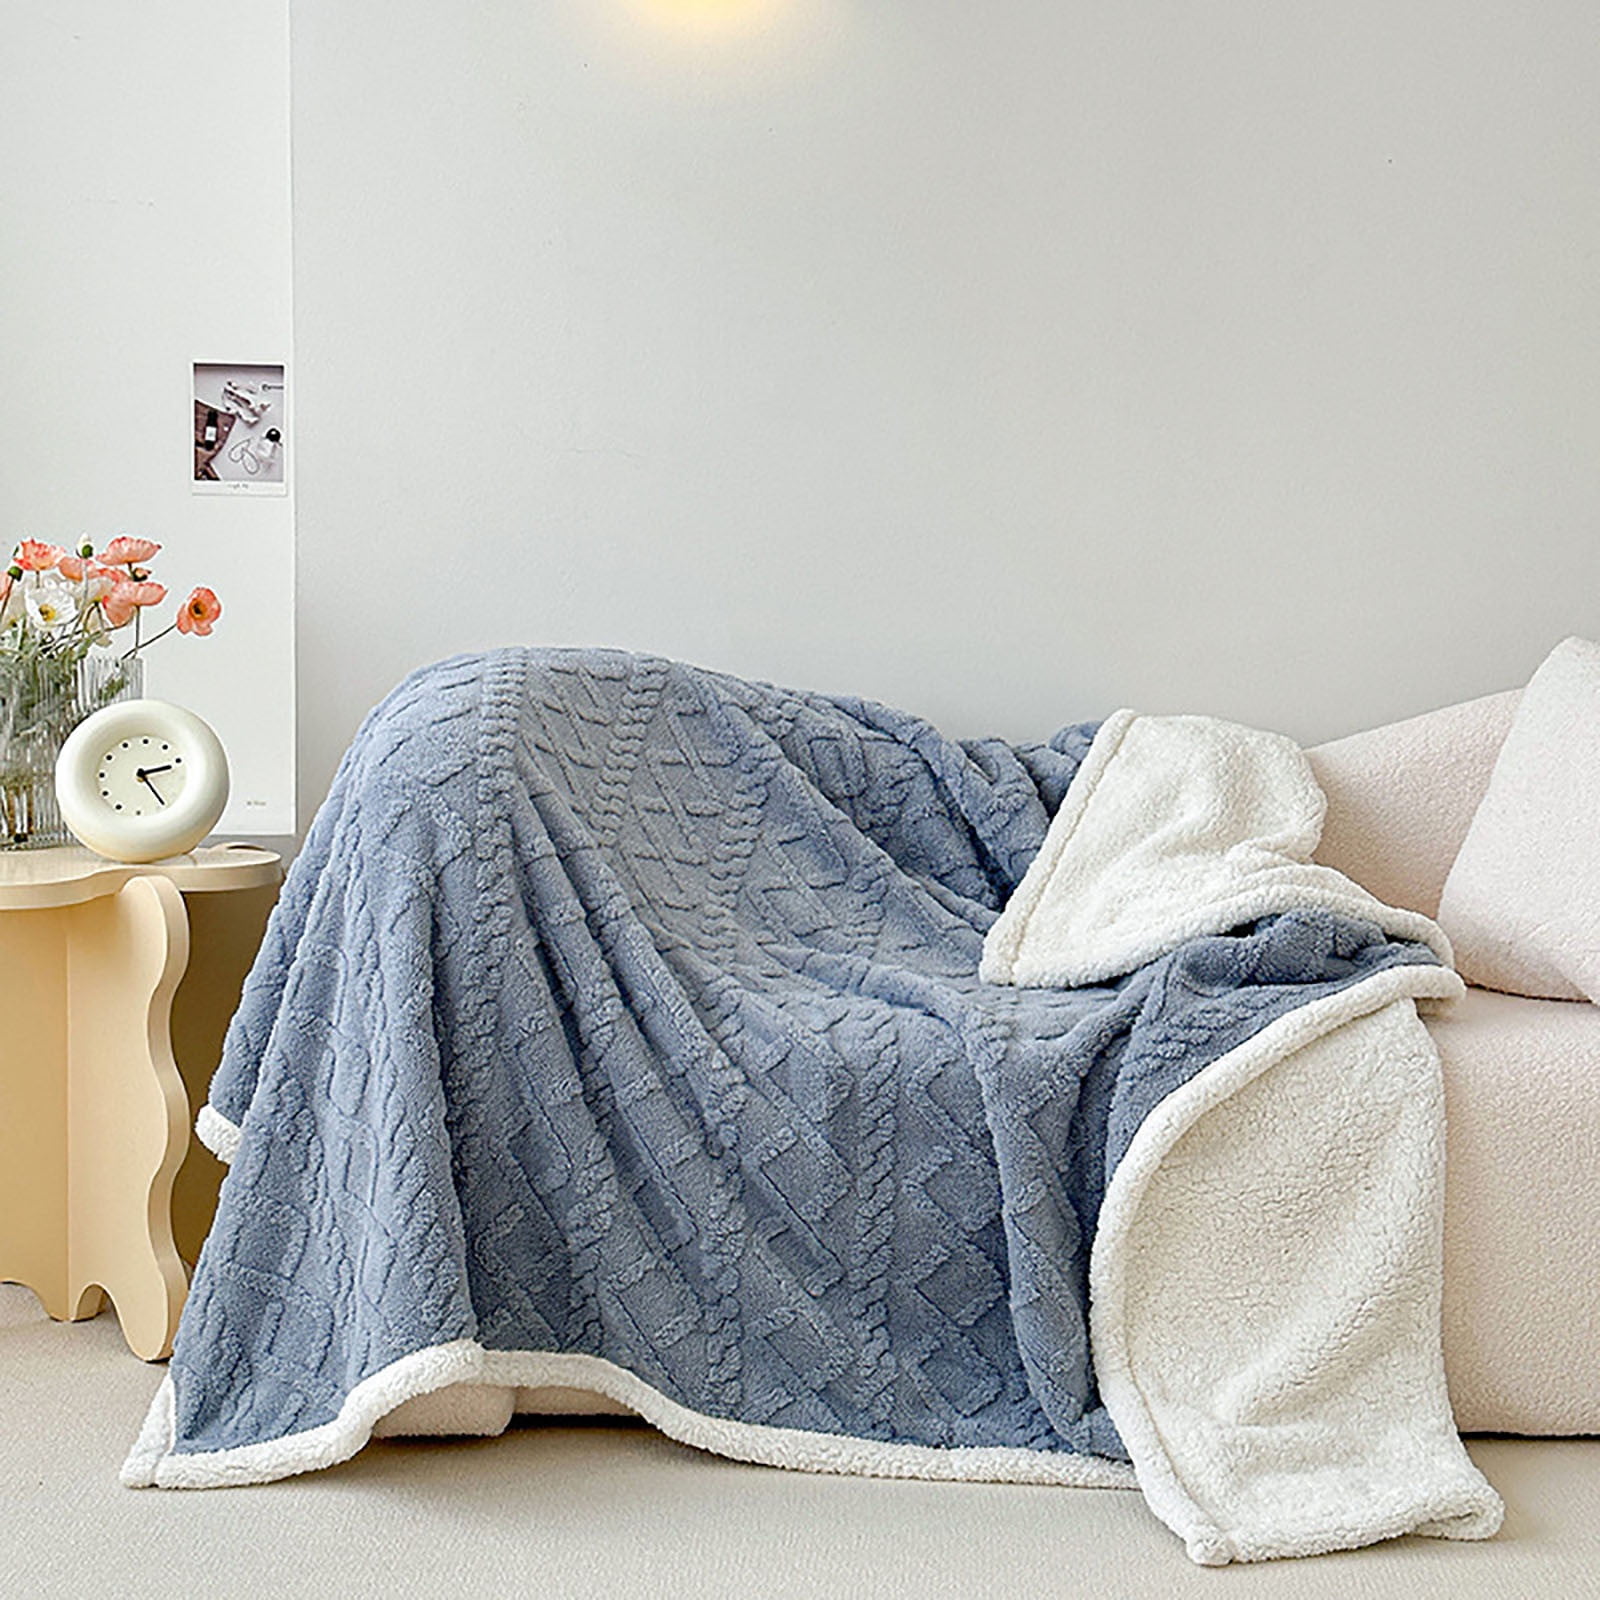 Qepwscx Large Size Soft Cashmere Blanket for Fall Winter 59*79 In